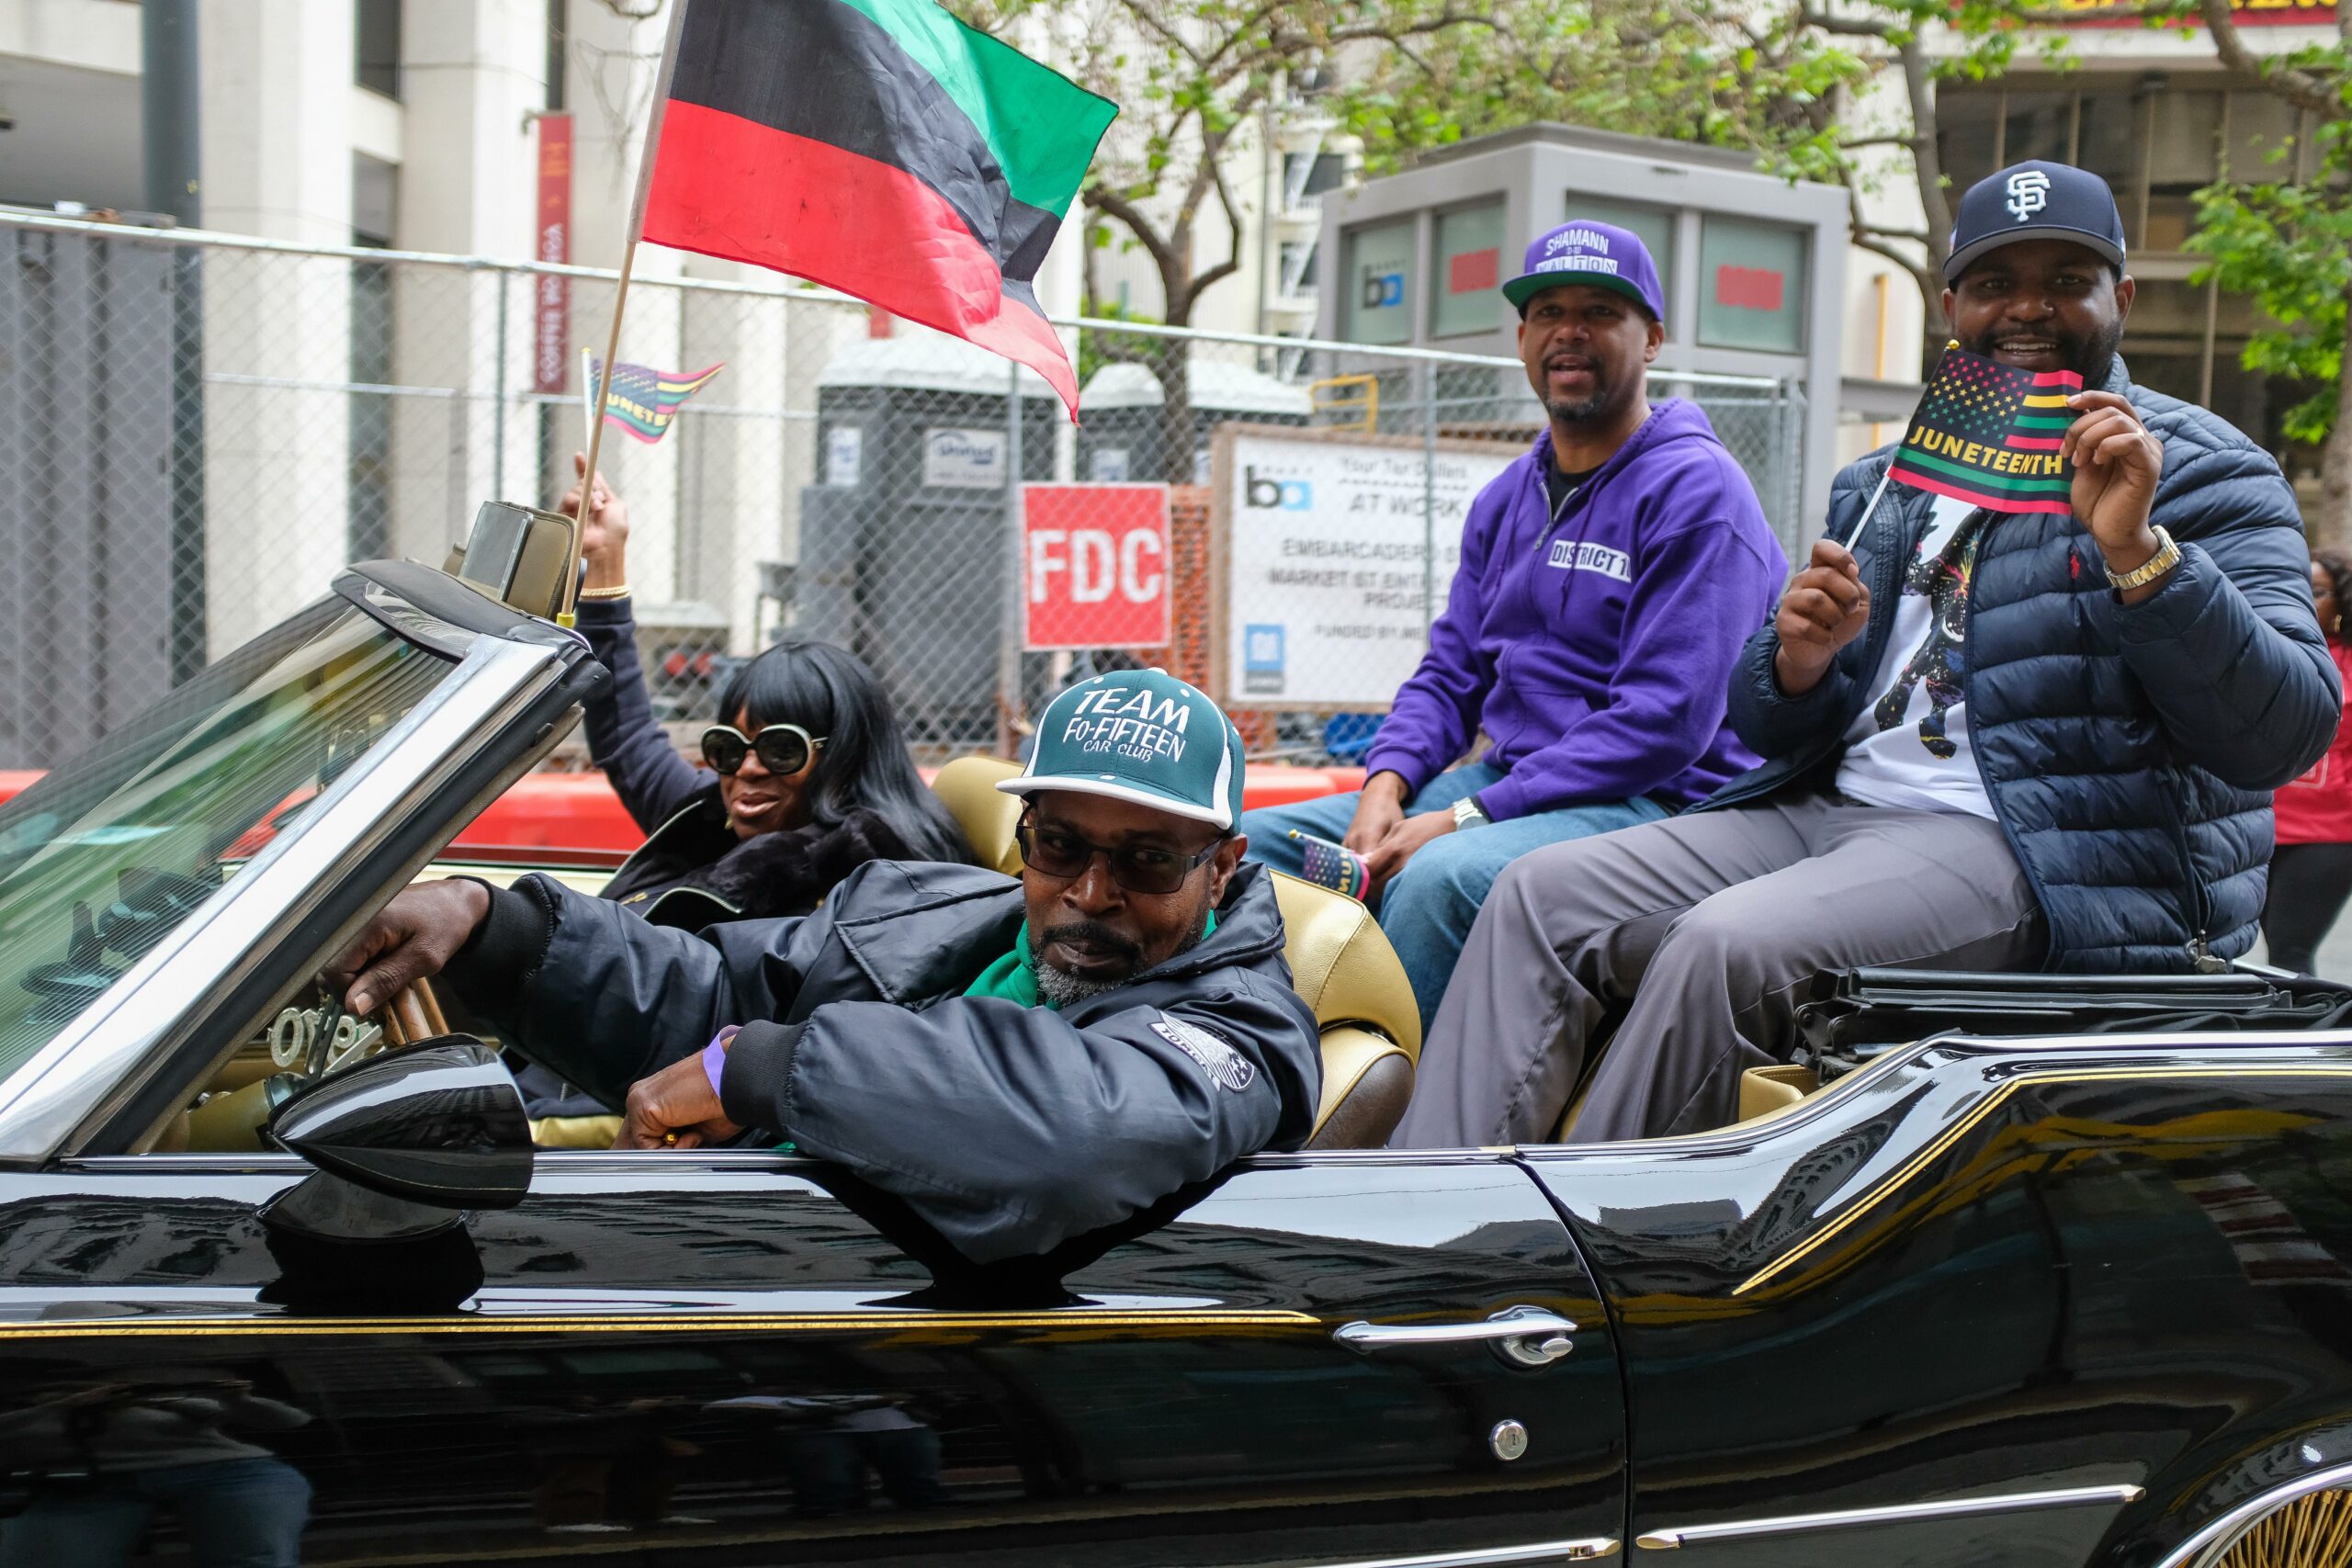 Four people are smiling in a black convertible car, holding a Pan-African flag and Juneteenth flag.